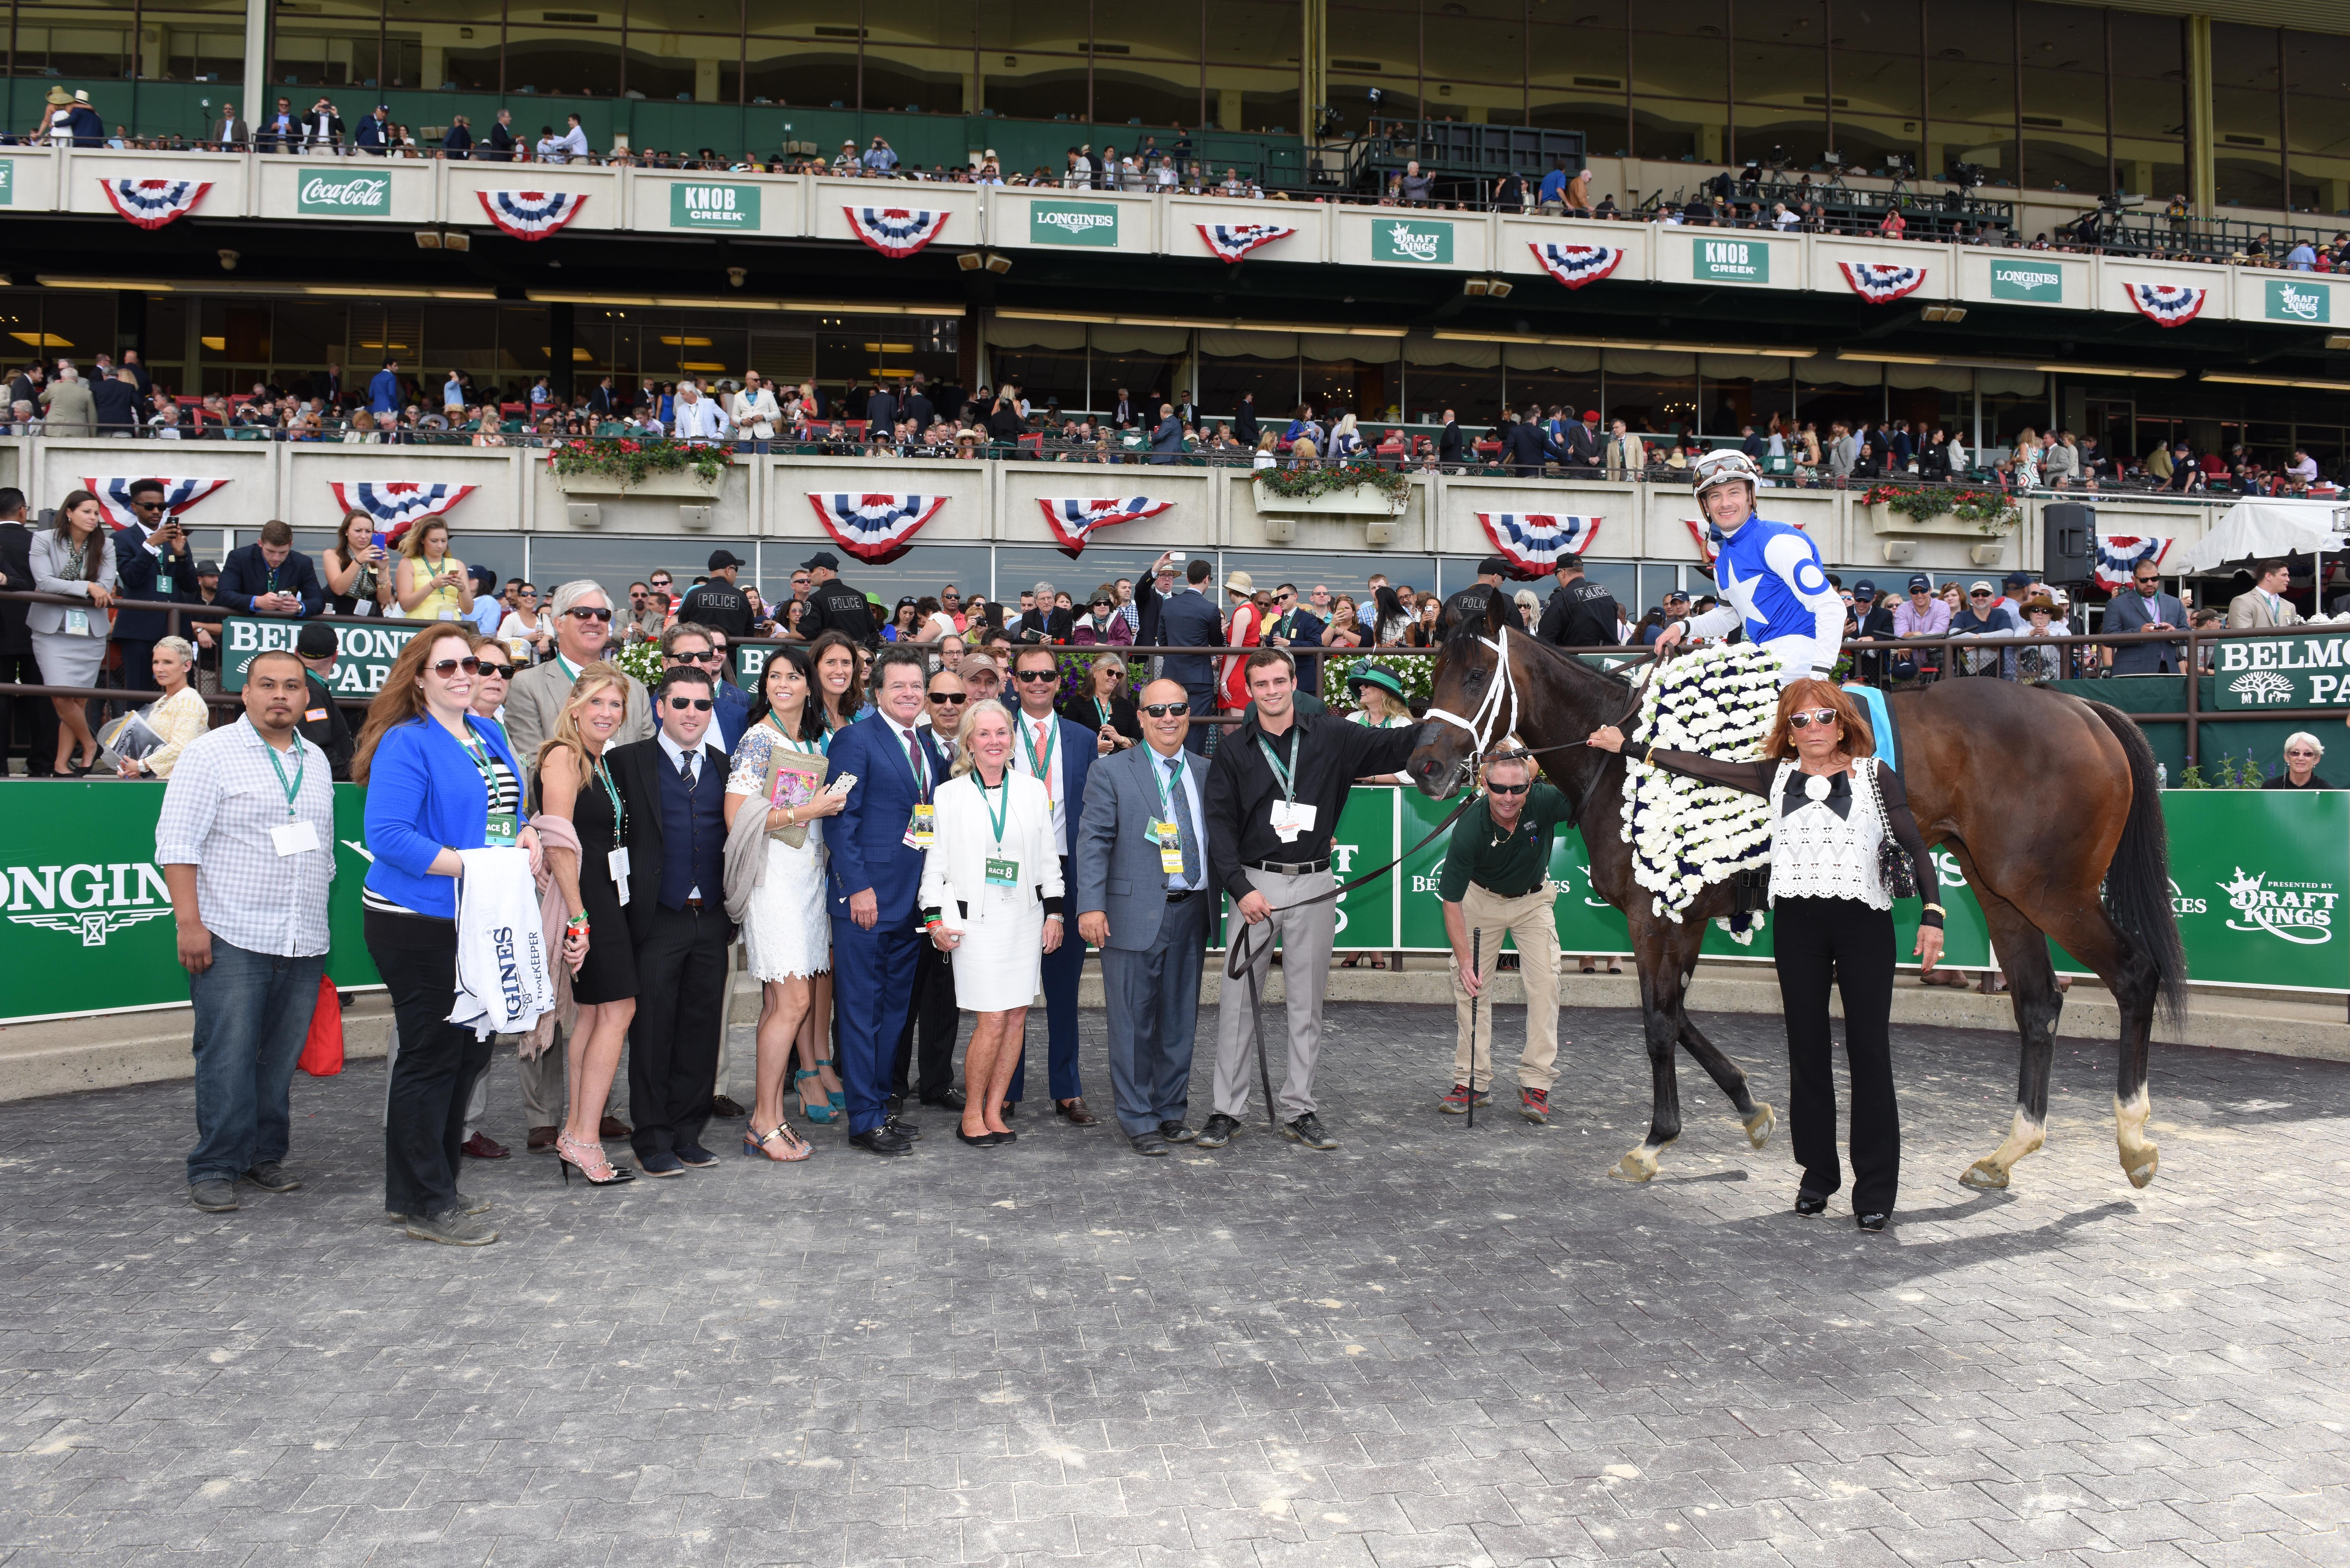 Tepin and connections in the winner's circle at Belmont after the 2015 Just a Game Stakes (NYRA)